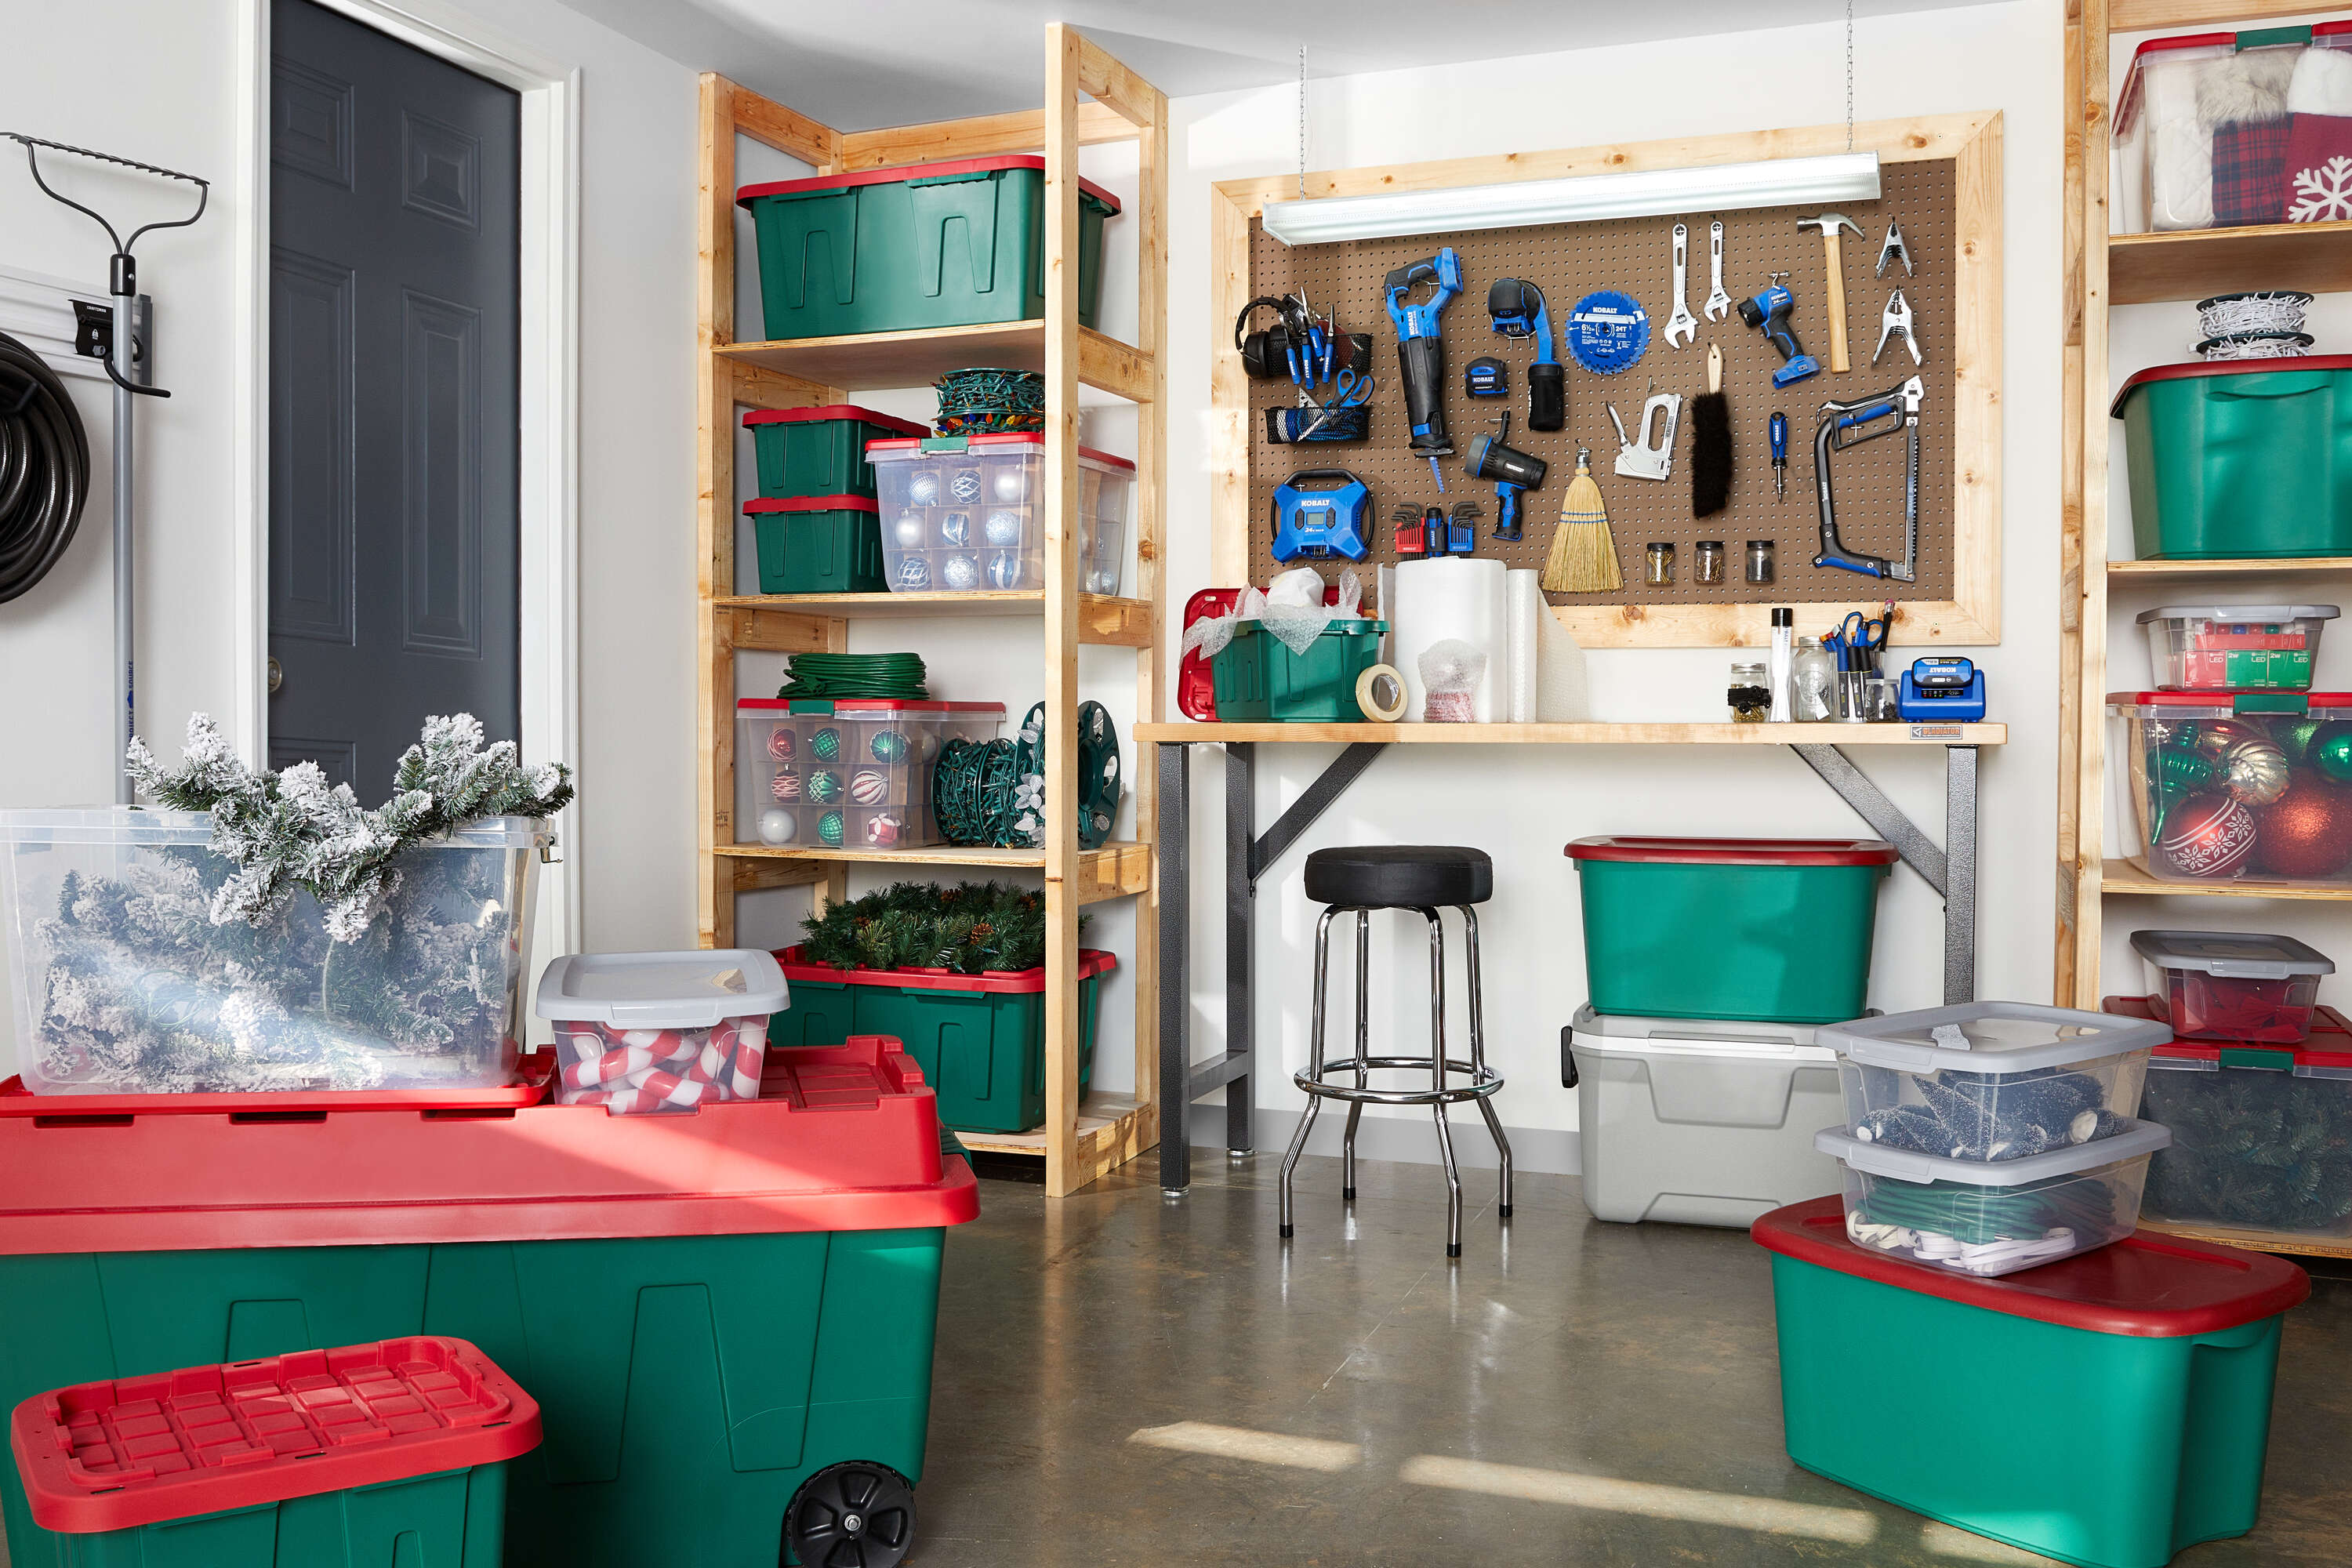 Holiday Storage Ideas - The Home Depot